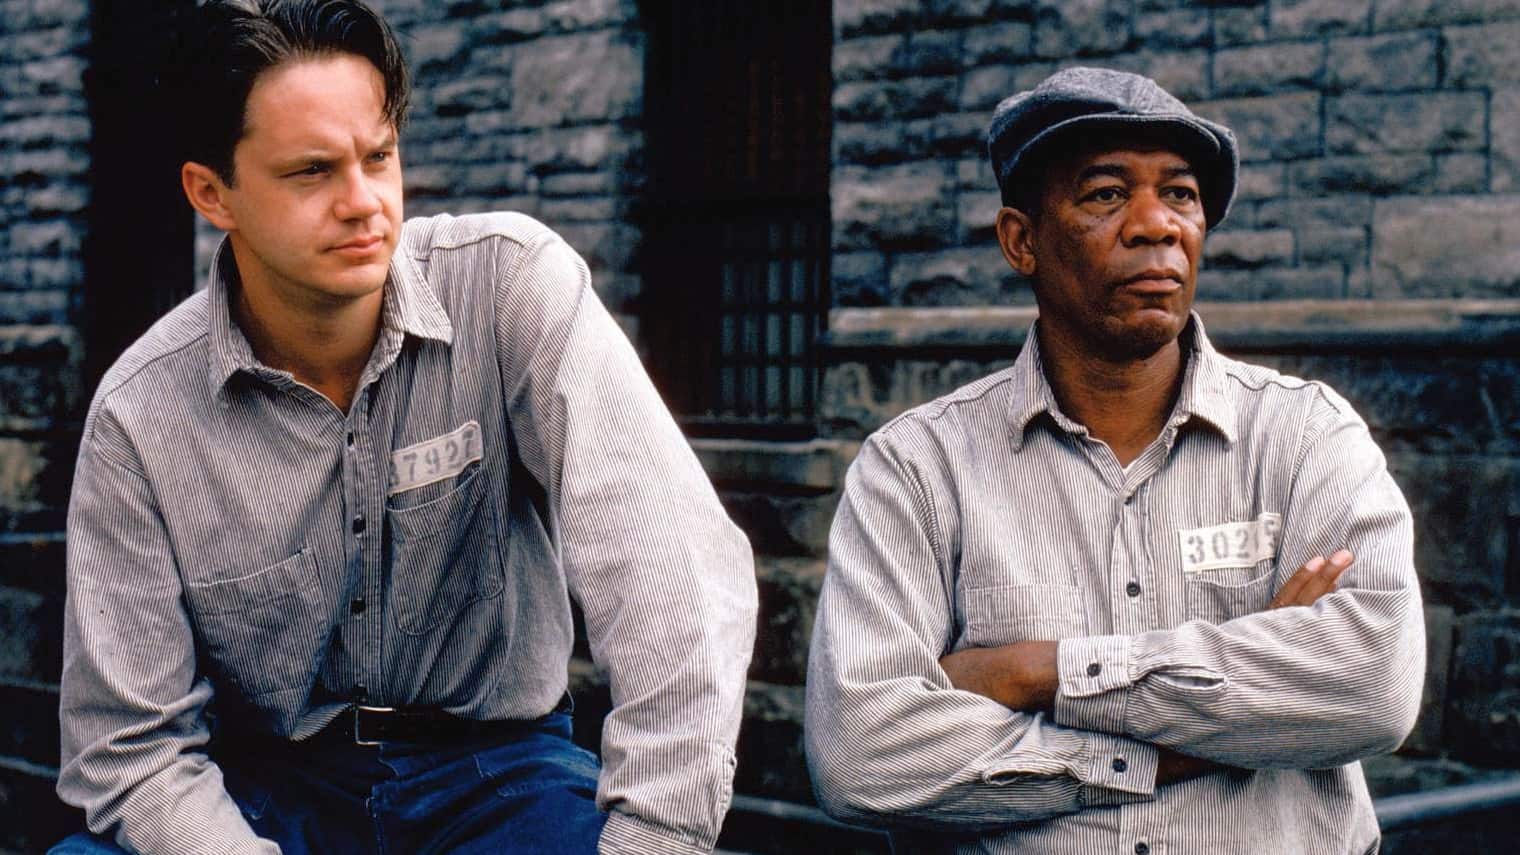 Andy Dufresne (Tim Robbins) and Ellis “Red” Redding (Morgan Freeman) become friends in Frank Darabont and Stephen King’sclassic film. Press photo courtesy of the Mahaiwe